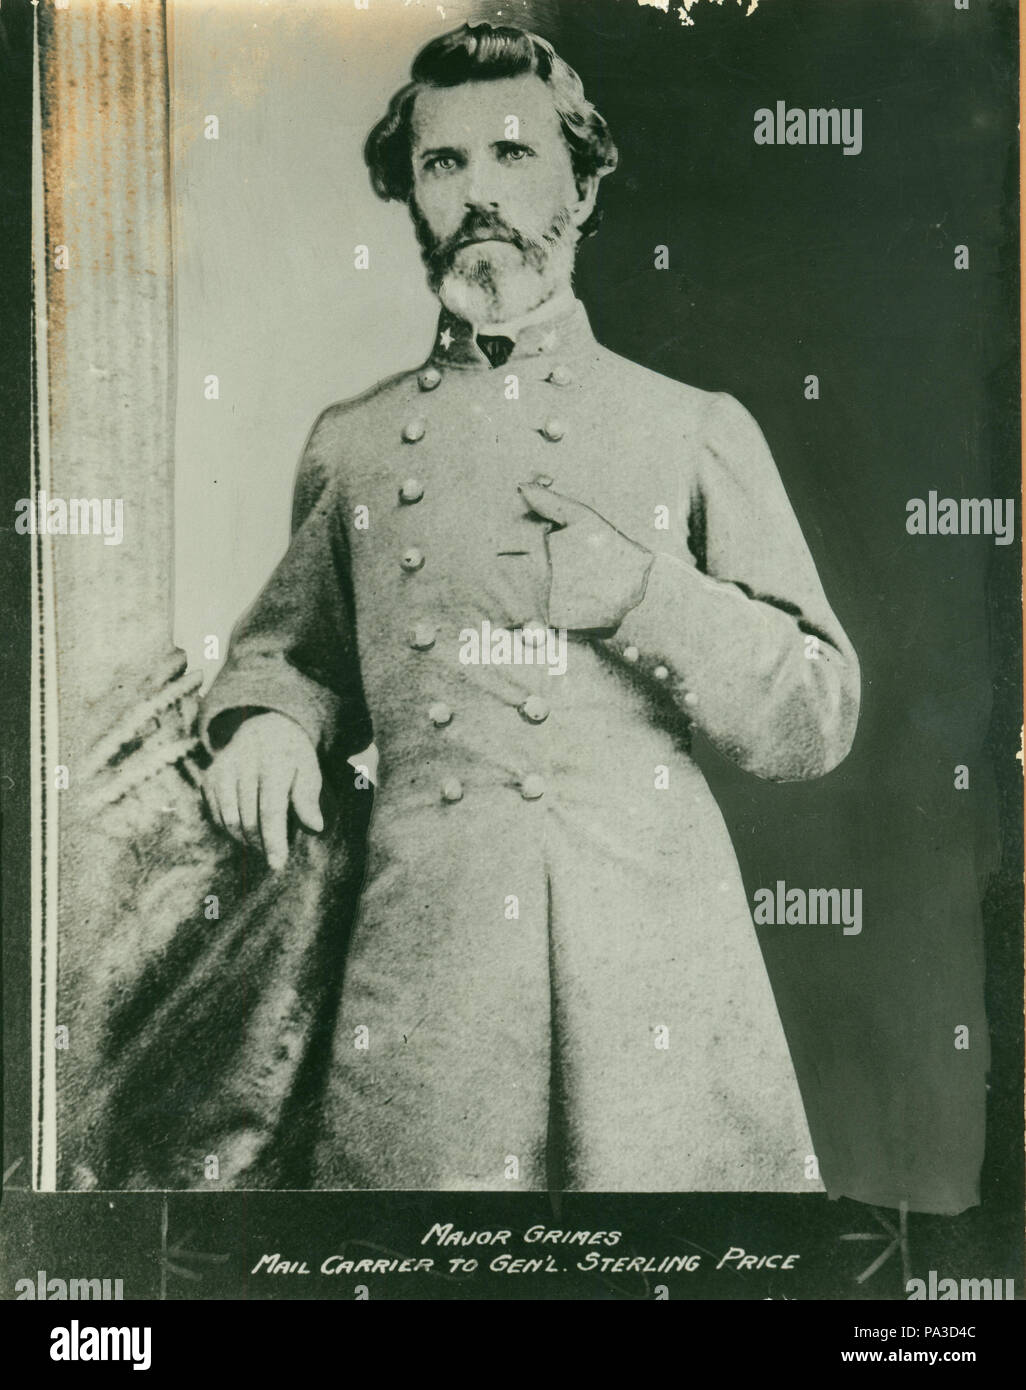 . English: Half-length portrait of a man in uniform. 'MAJOR GRIMES MAIL CARRIER TO GEN'L STERLING PRICE' (written below image). Grimes was a Confederate mail carrier and one time guest of Gratiot Street Prison. Title: Absalom Grimes, Major (Confederate). between 1861 and 1865 96 Absalom Grimes, Major (Confederate) Stock Photo